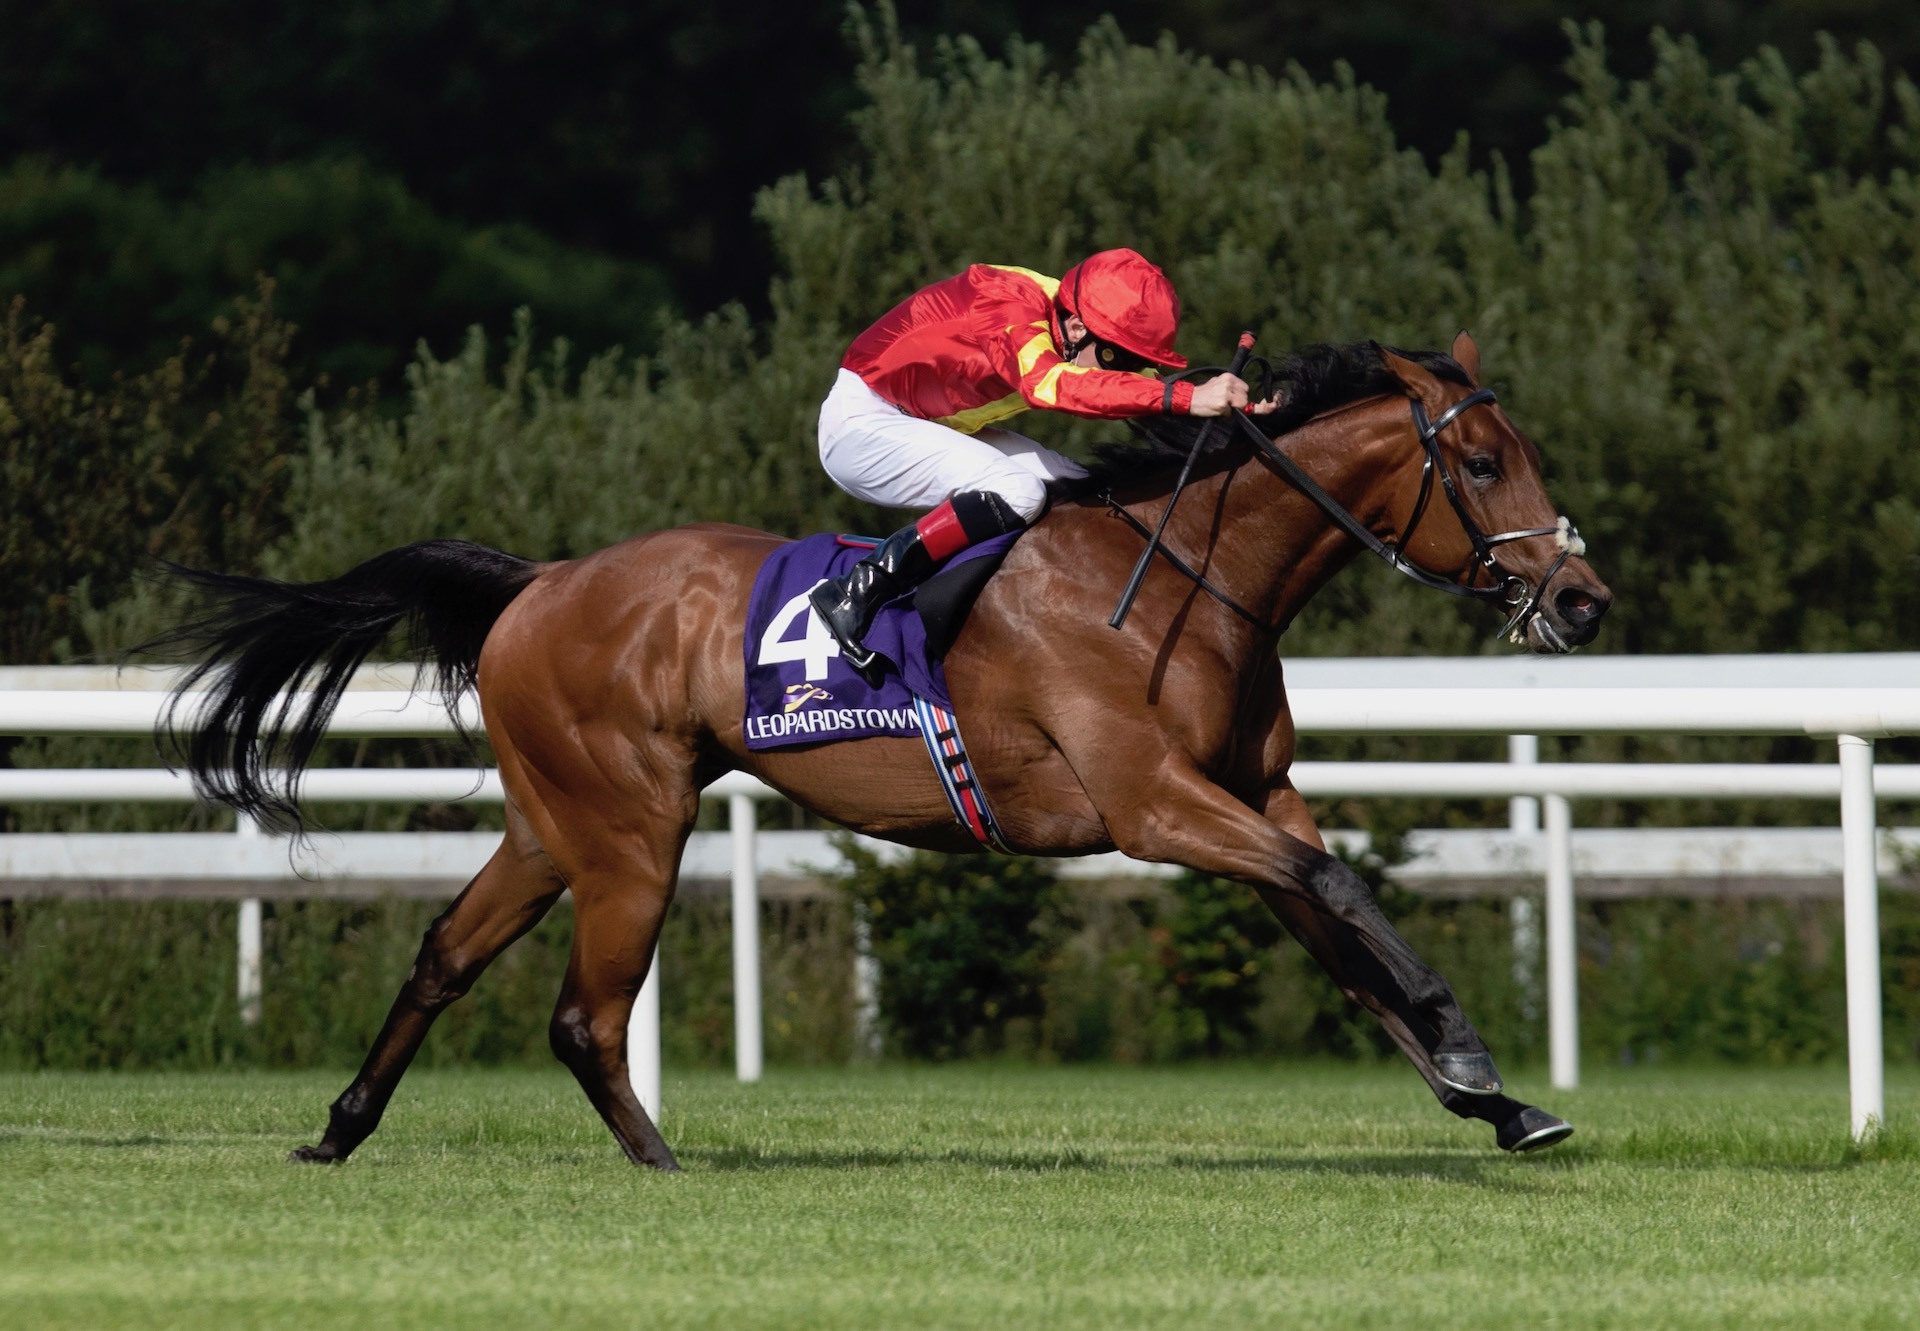 Patrick Sarsfield (Australia) Wins The Gr.3 Meld Stakes at Leopardstown